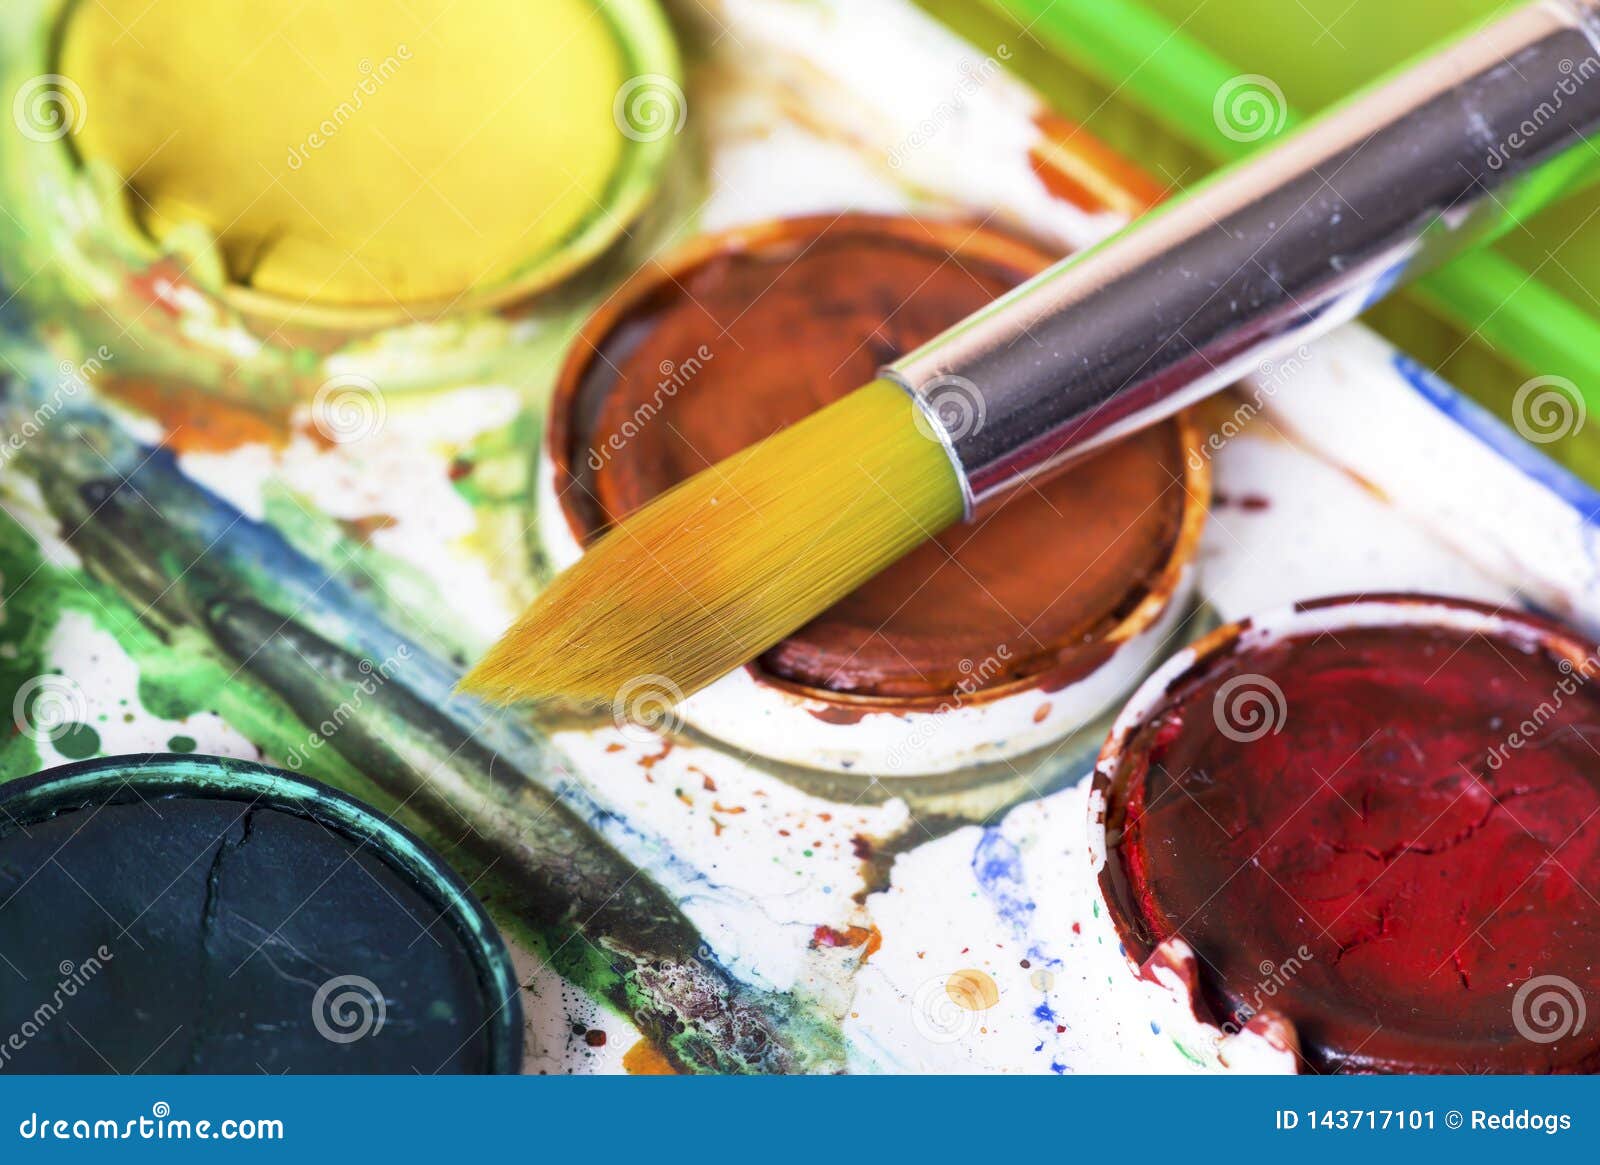 Closeup of Used Watercolor Paintbox with Brush Stock Image - Image of ...